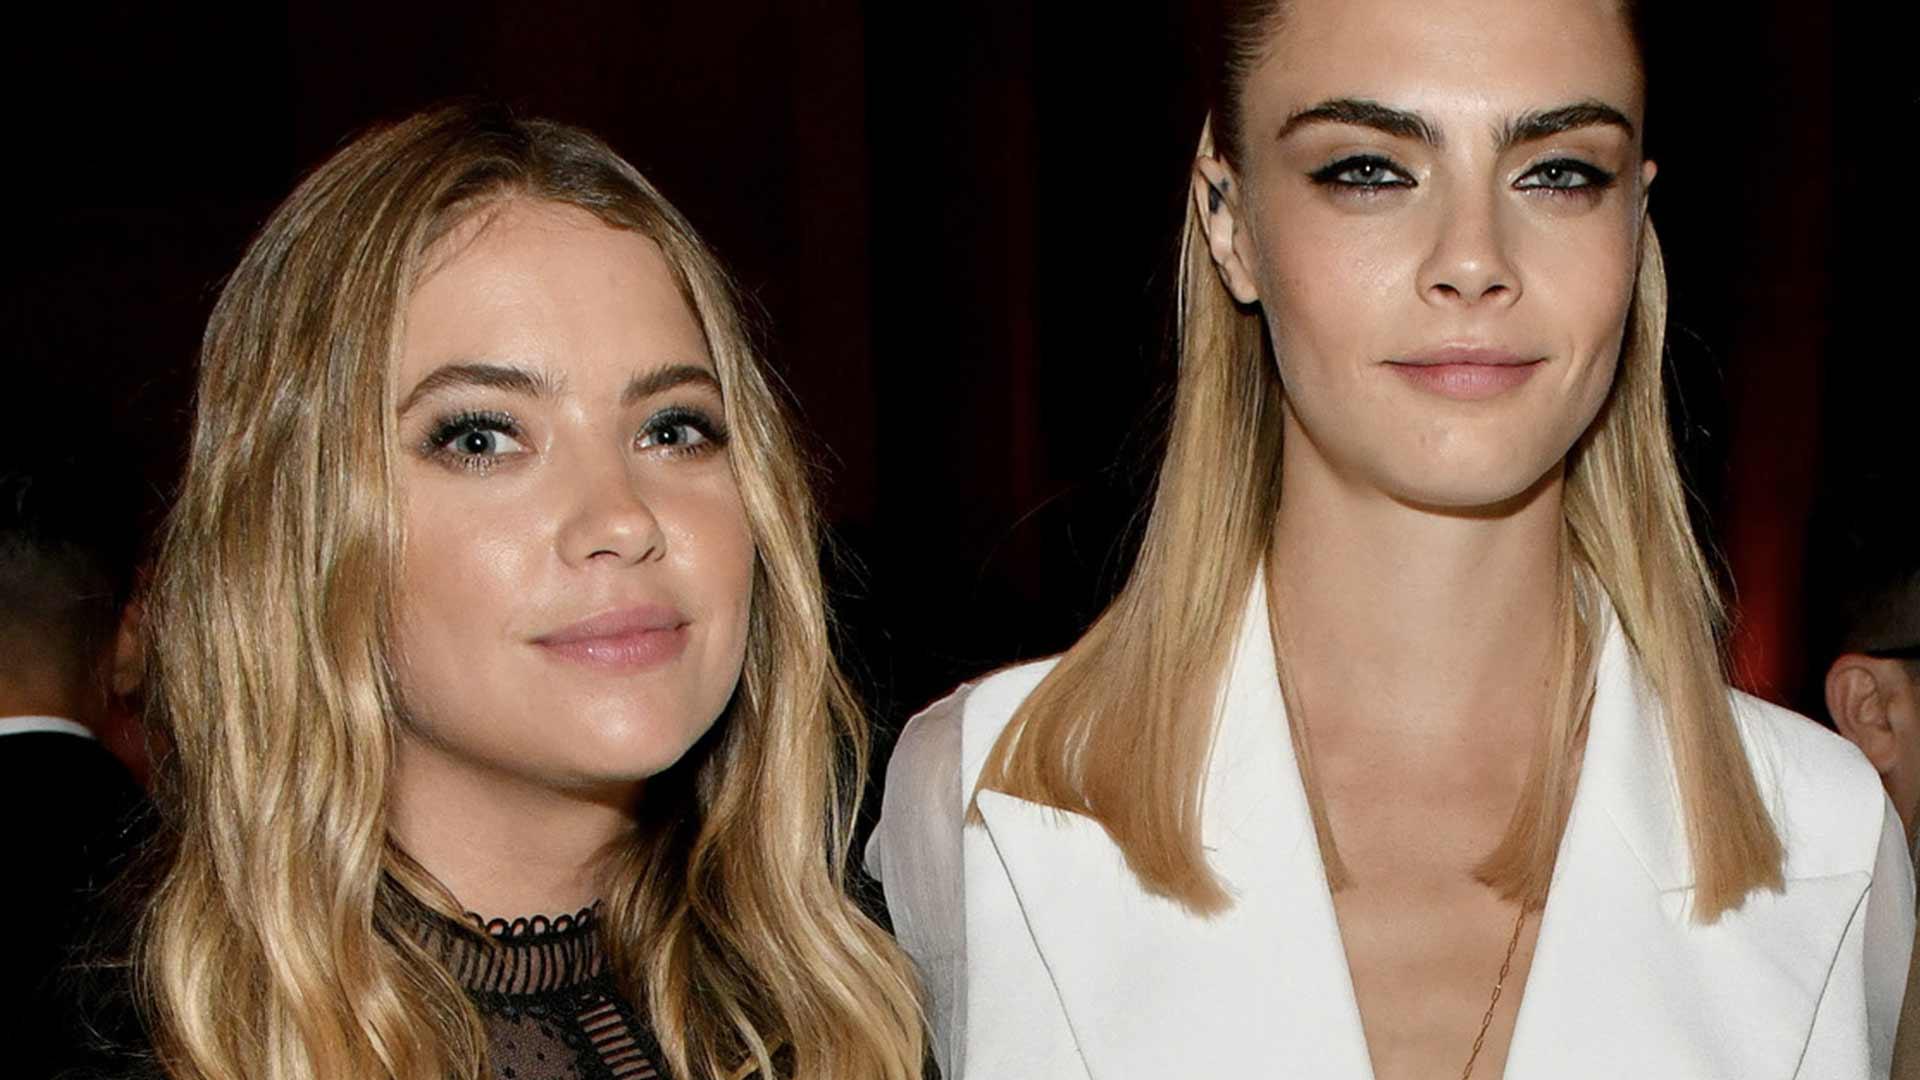 Cara Delevingne and Ashley Benson Are NOT Engaged, Despite Ring Pics